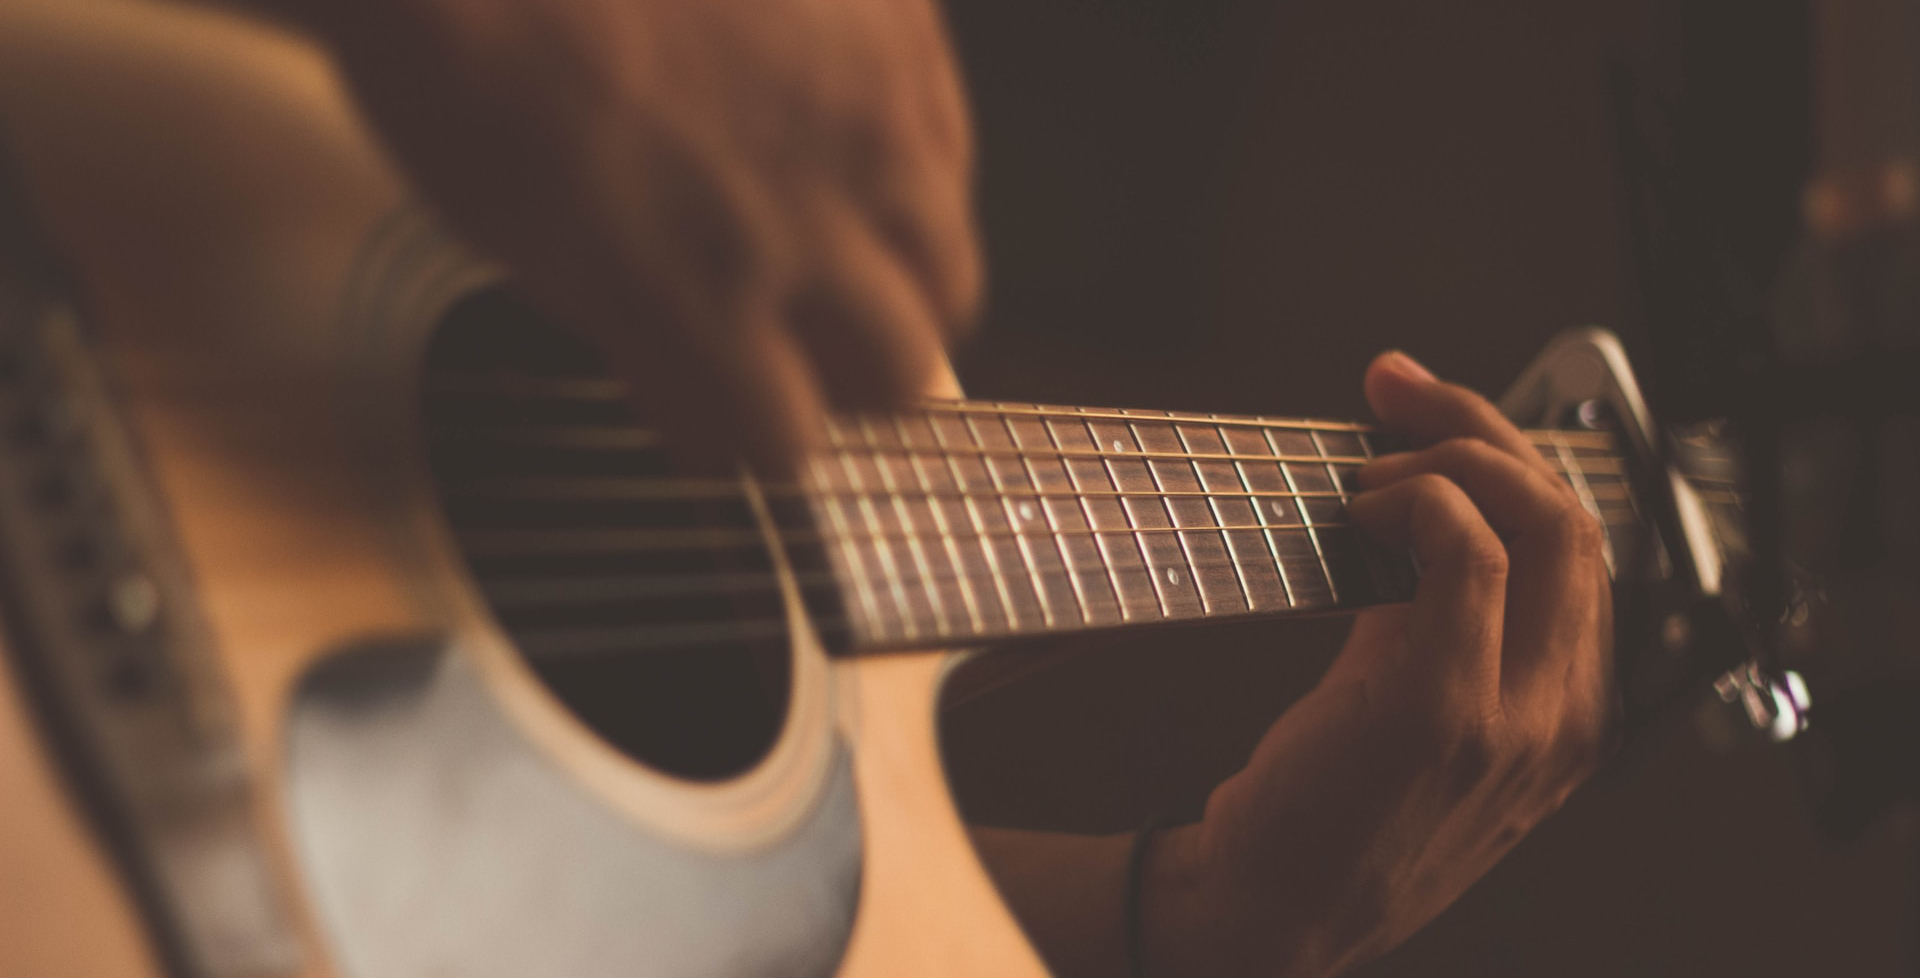 Close up blurry image of a man playing a guitar